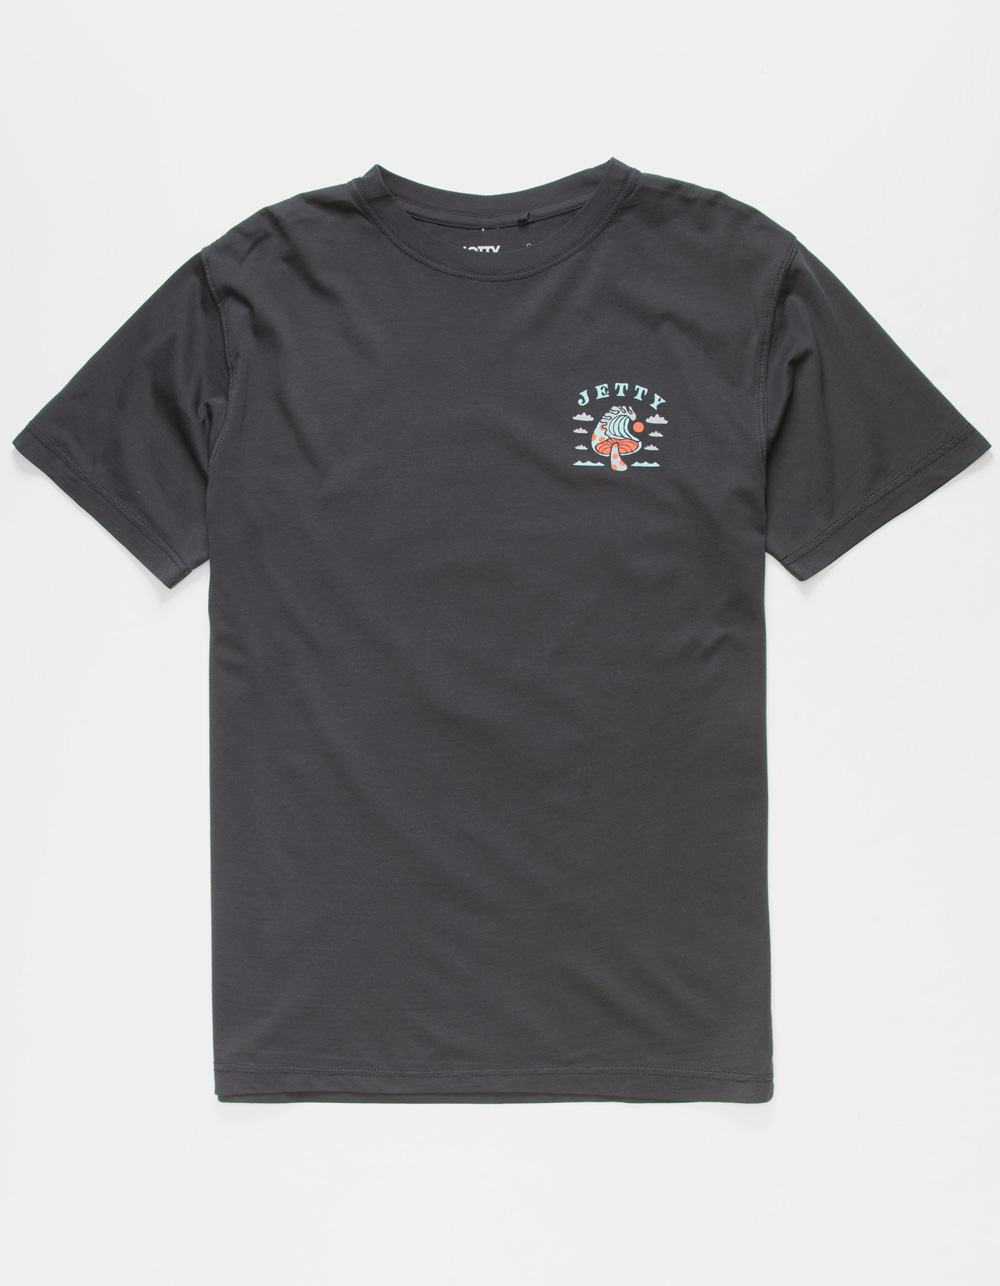 JETTY Surf Trip Mens Tee - CHARCOAL | Tillys